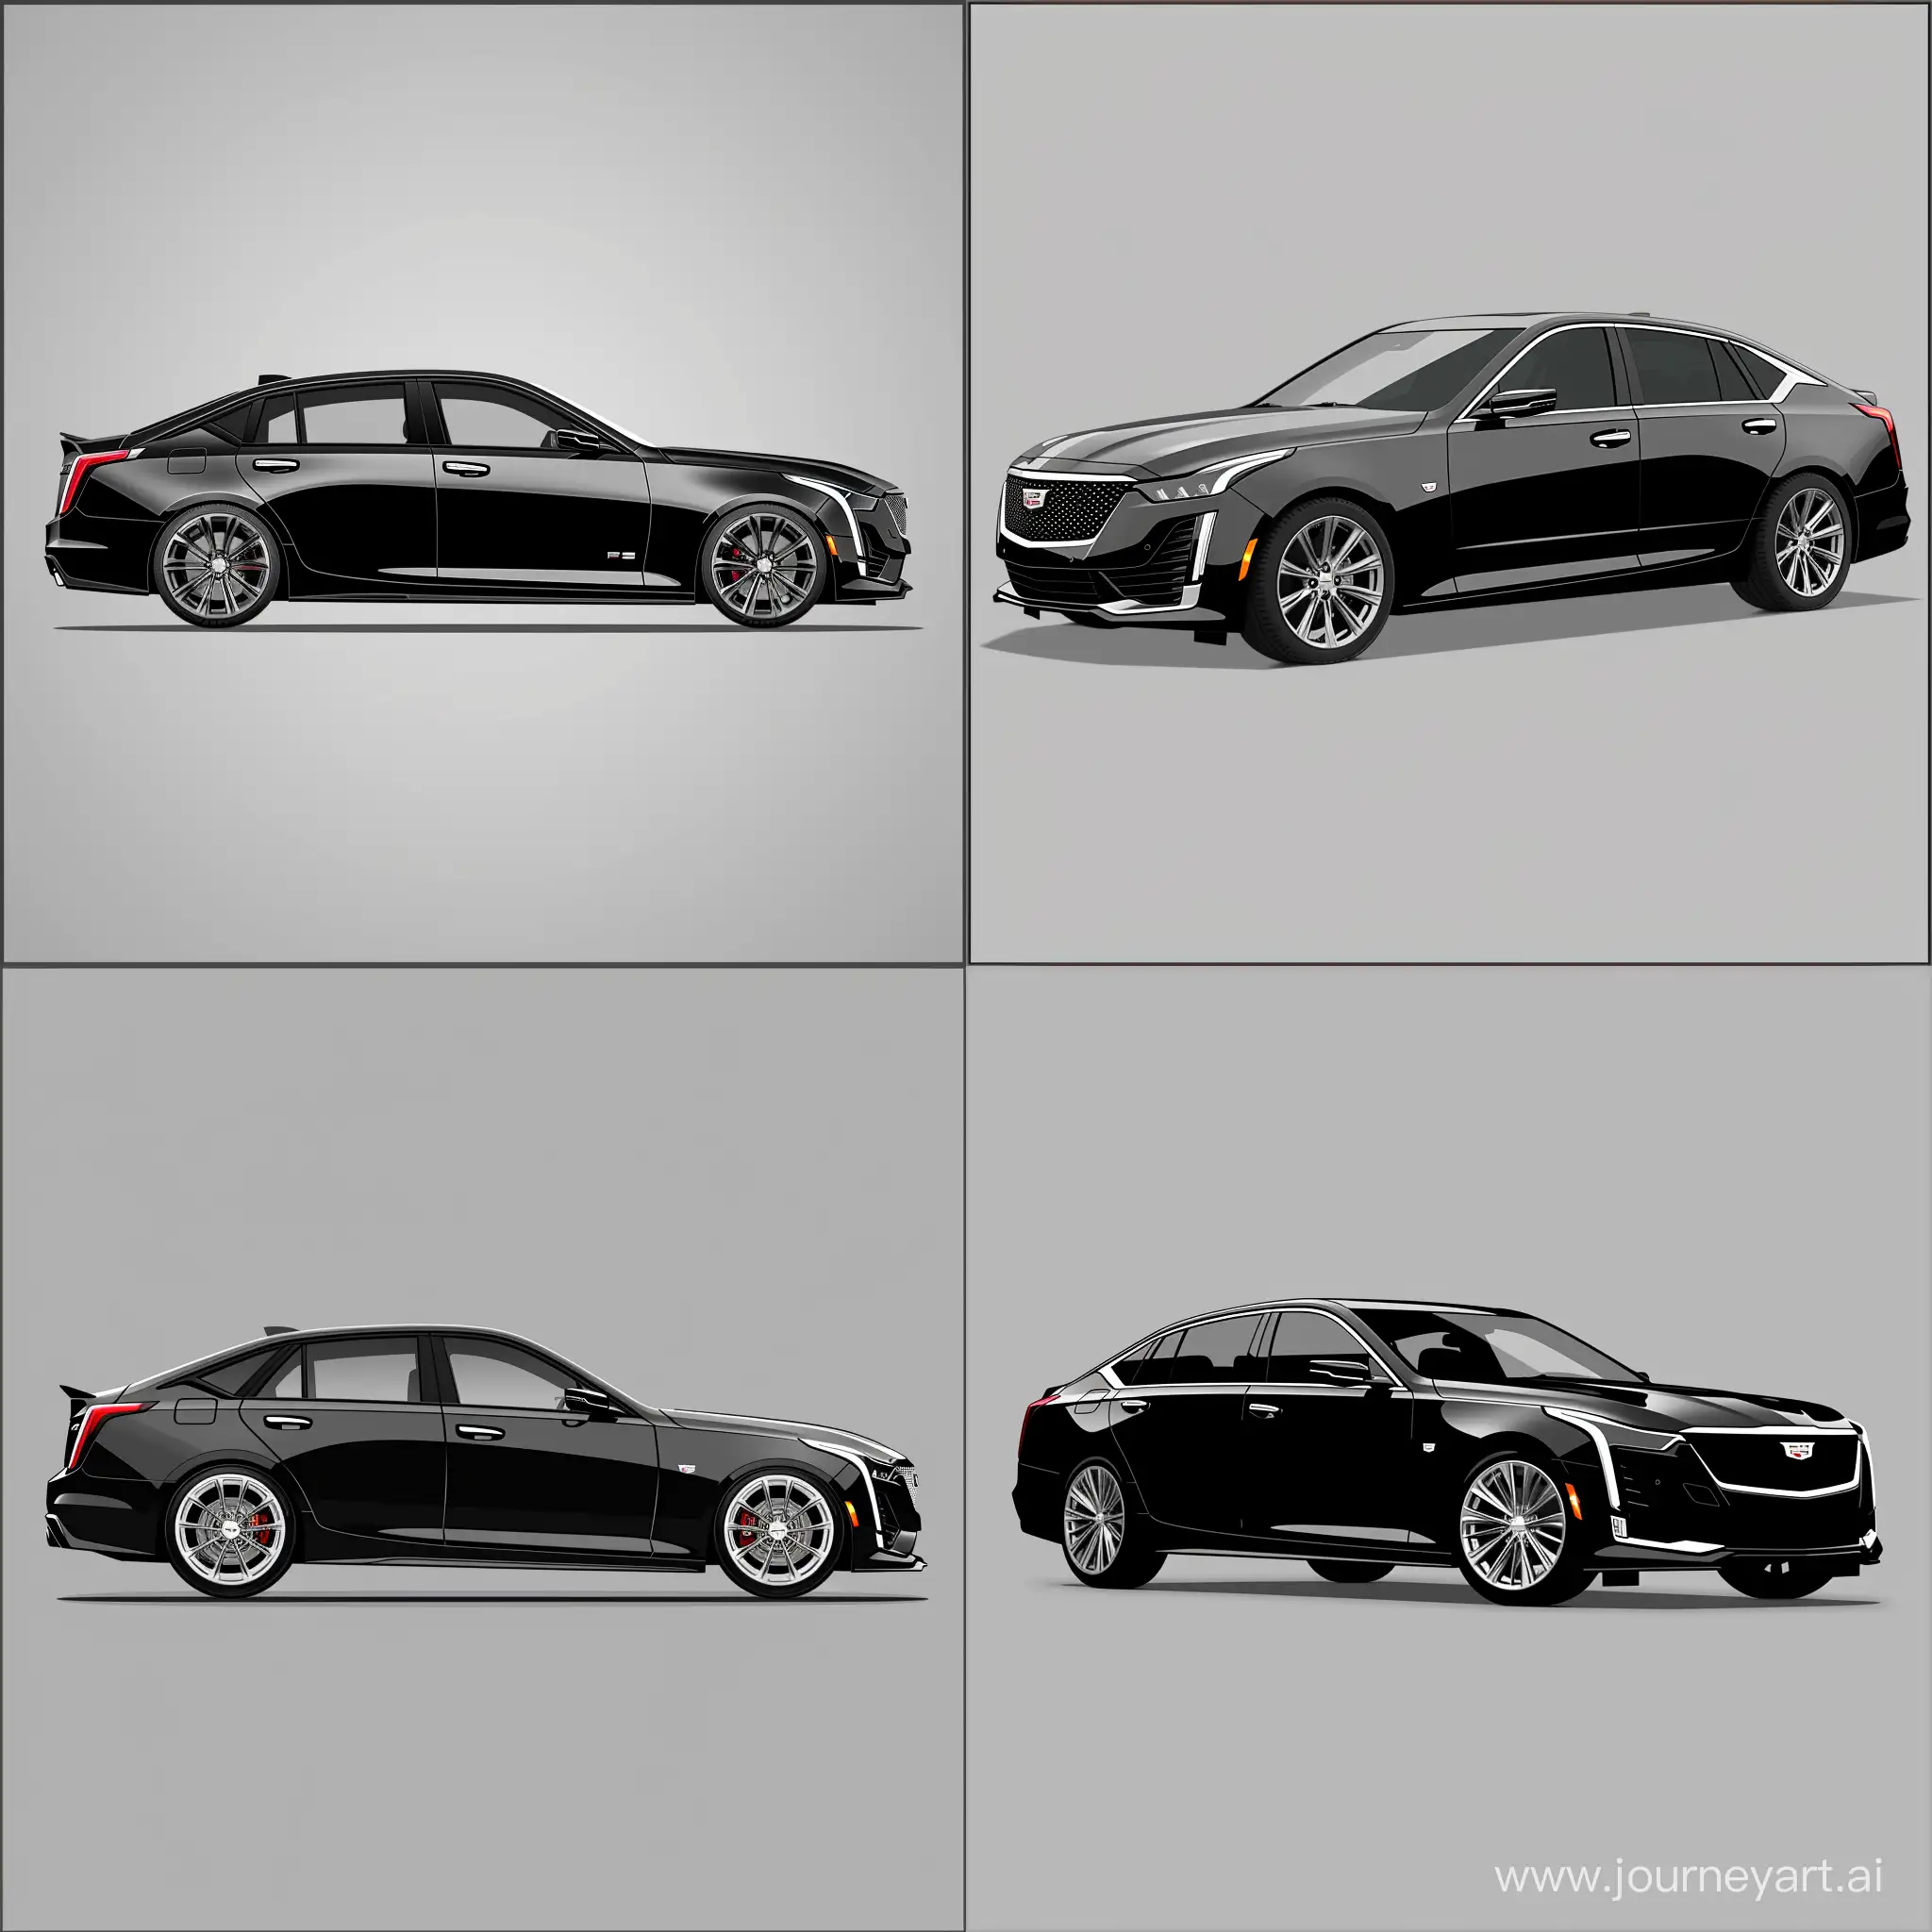 Cadillac CT5 : Black Body Color, Silver Rims - Simple Gray Background - Car 2/3 View - Minimalism 2D Illustration - Adobe Illustrator Software - High Precision